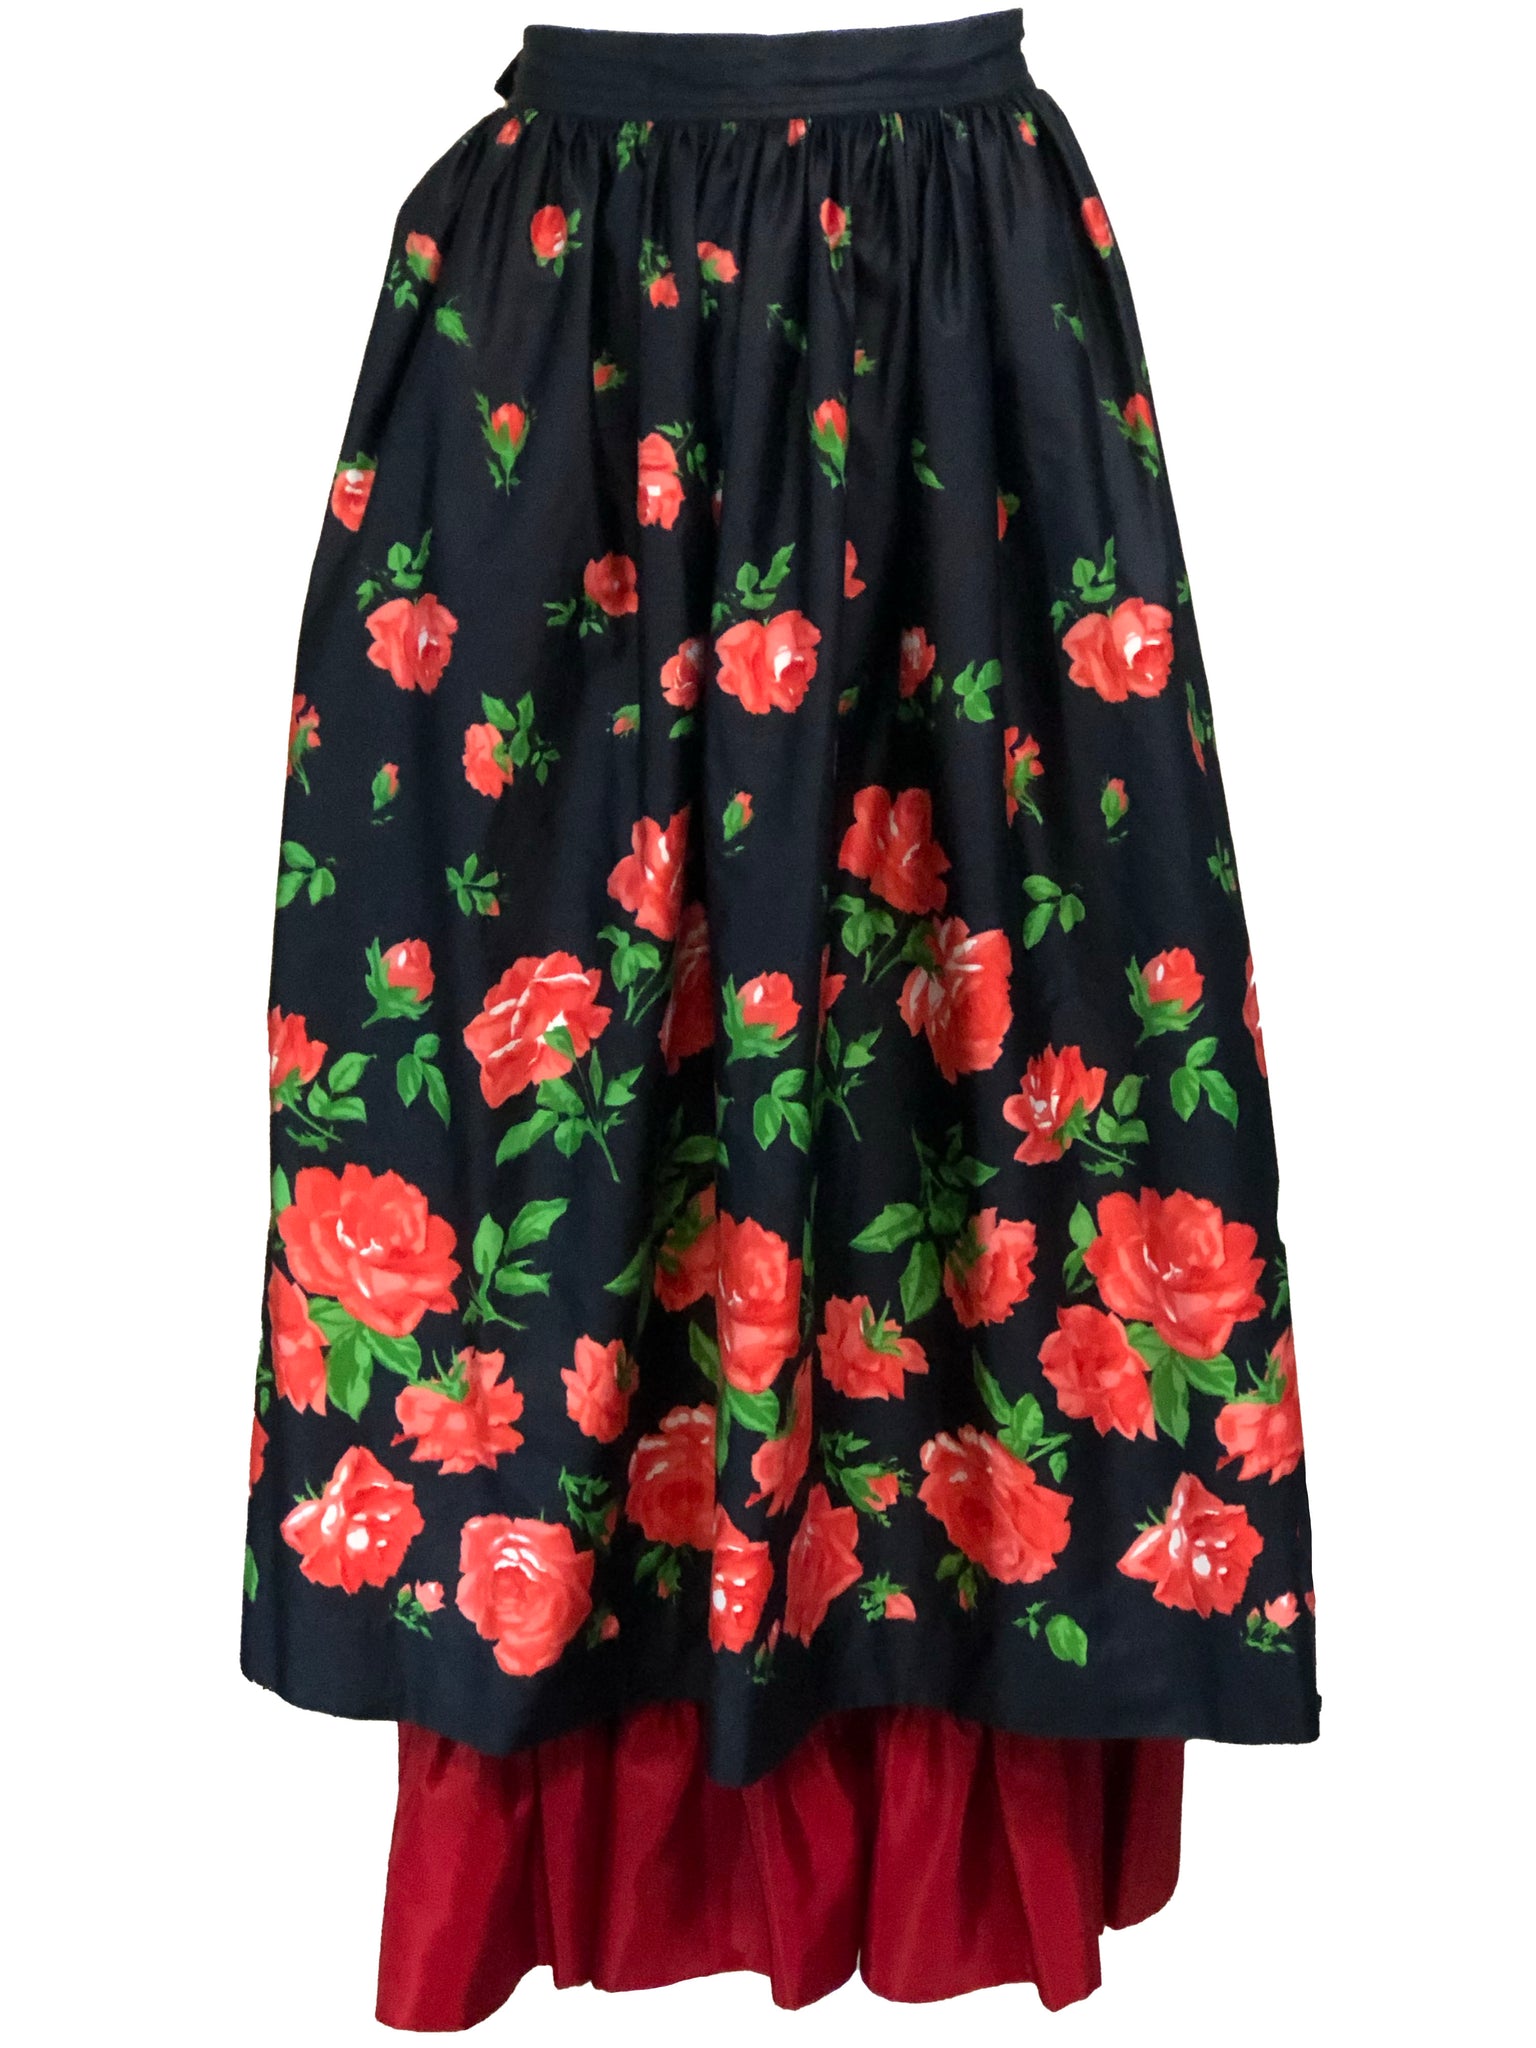 Saint Laurent Rive Gauche Layered Peasant skirt in Black and Red Floral  BACK 3 of 4